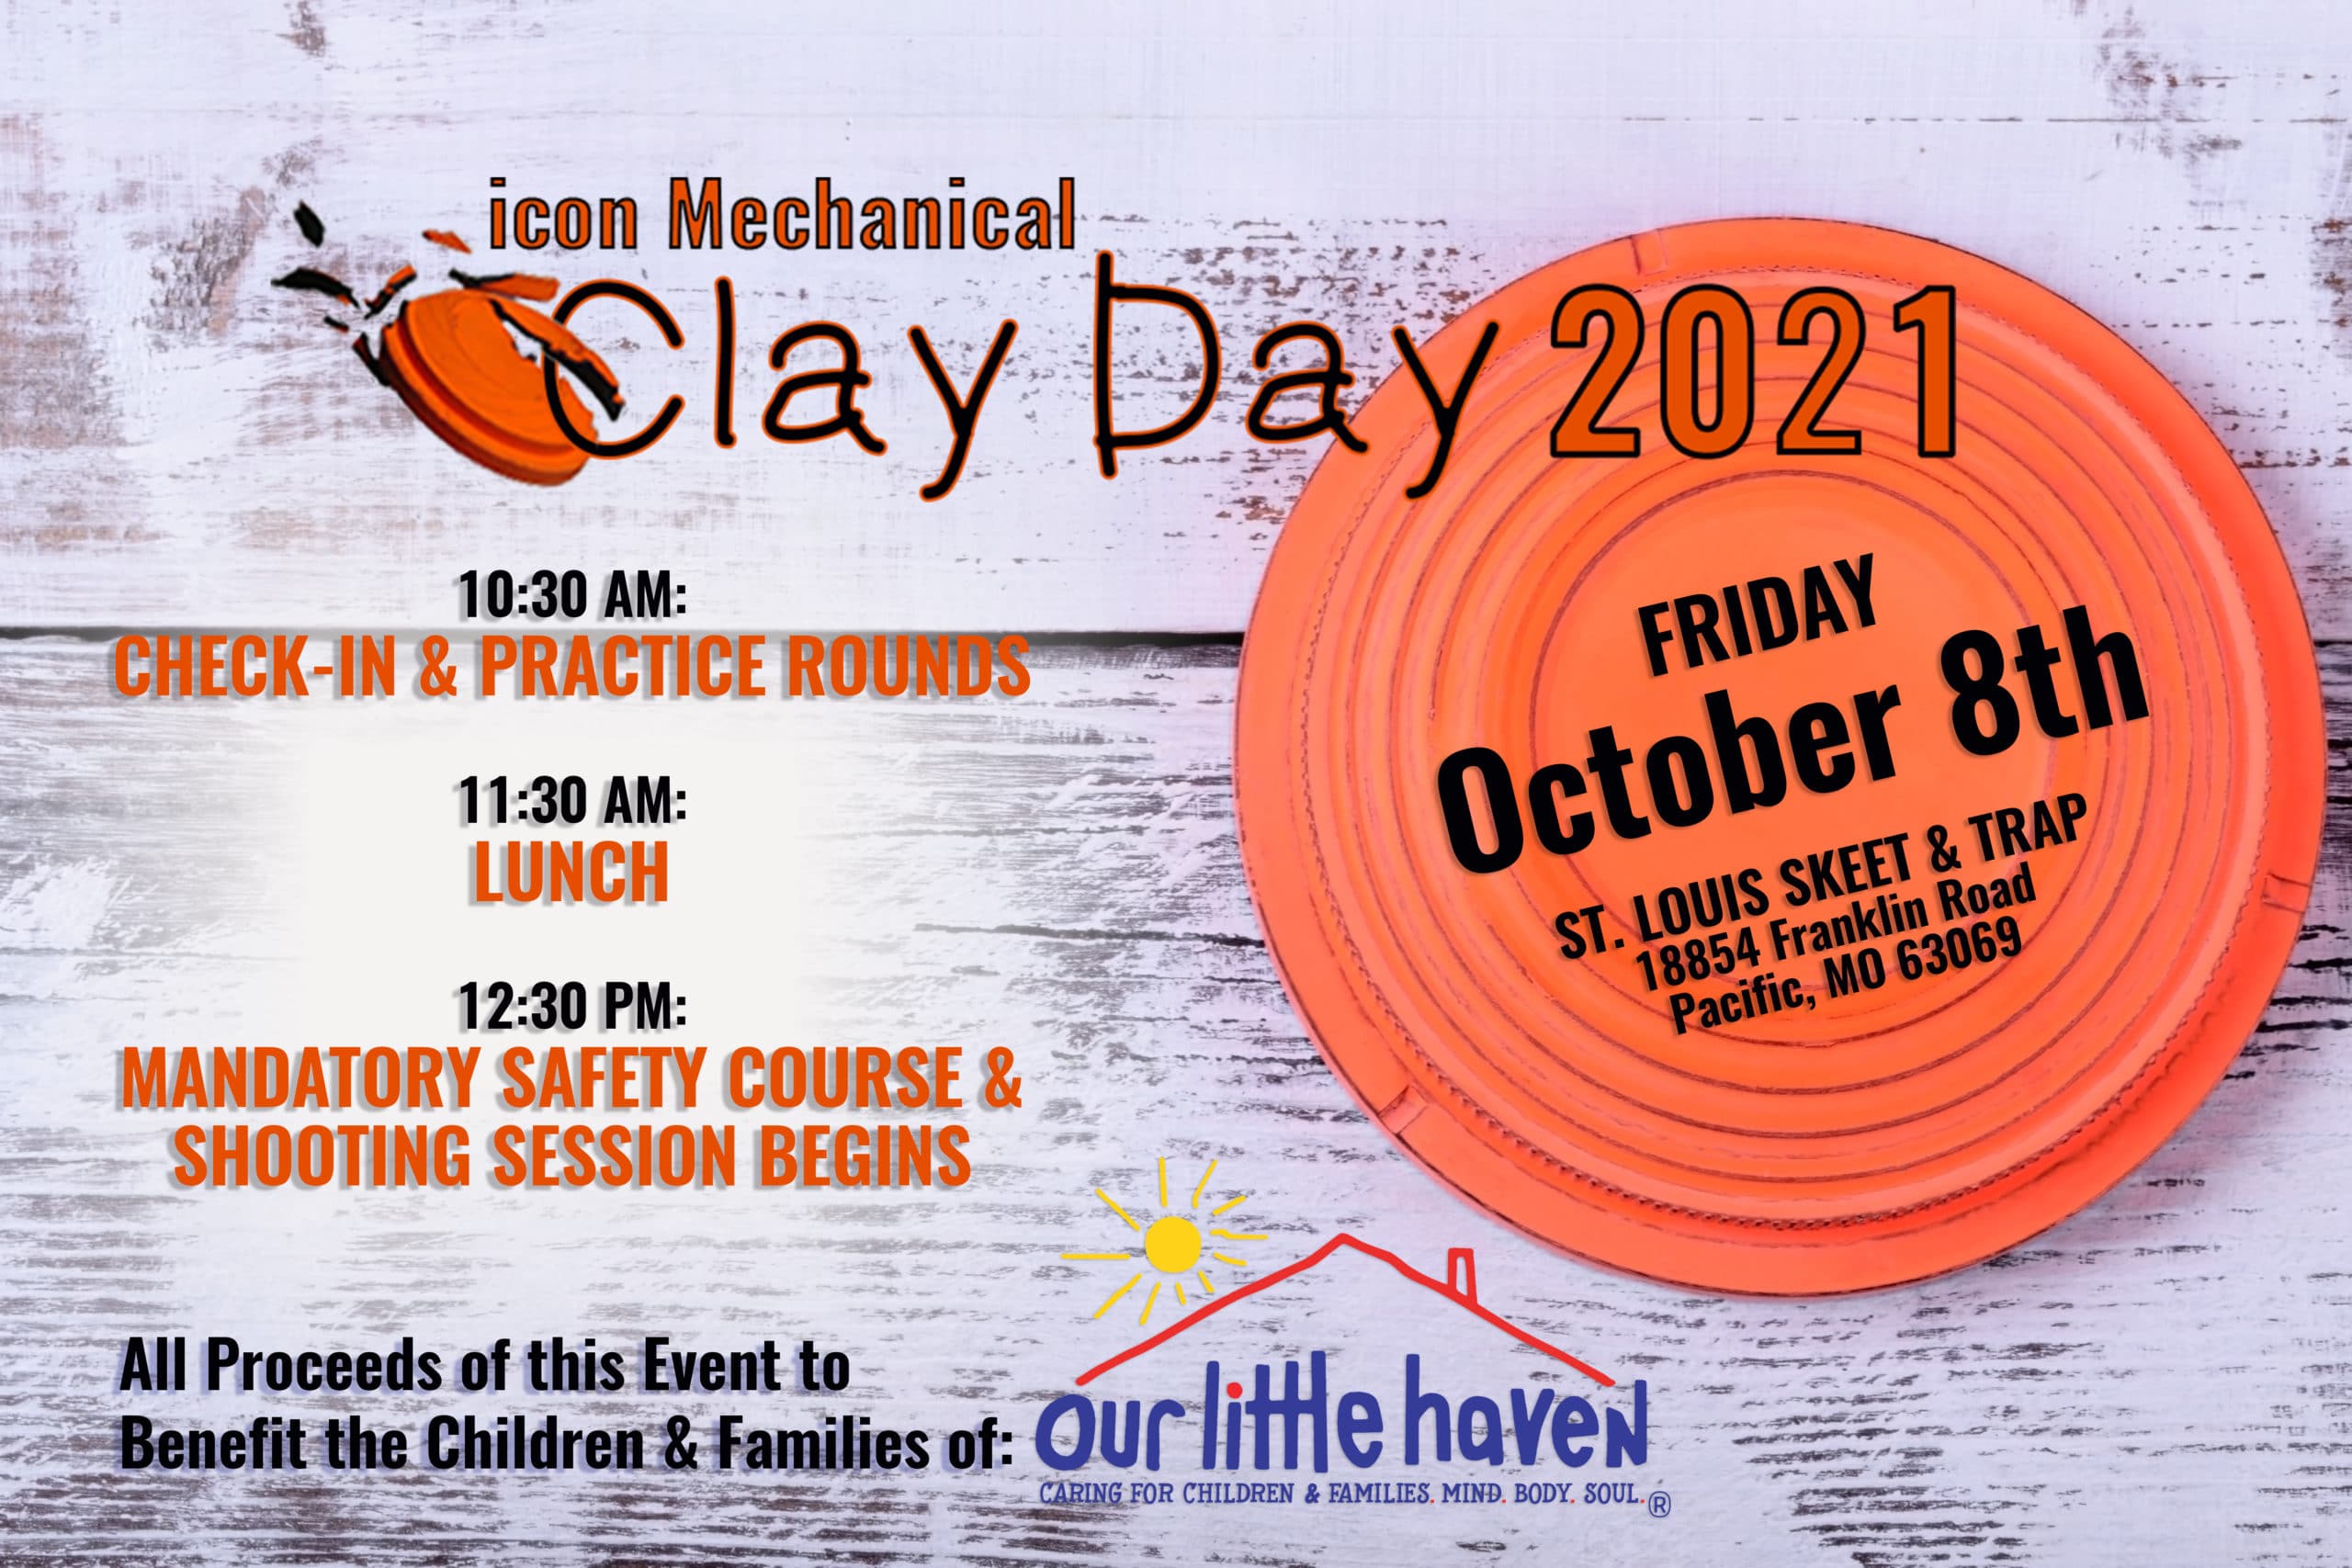 2021 Clay Day Flyer